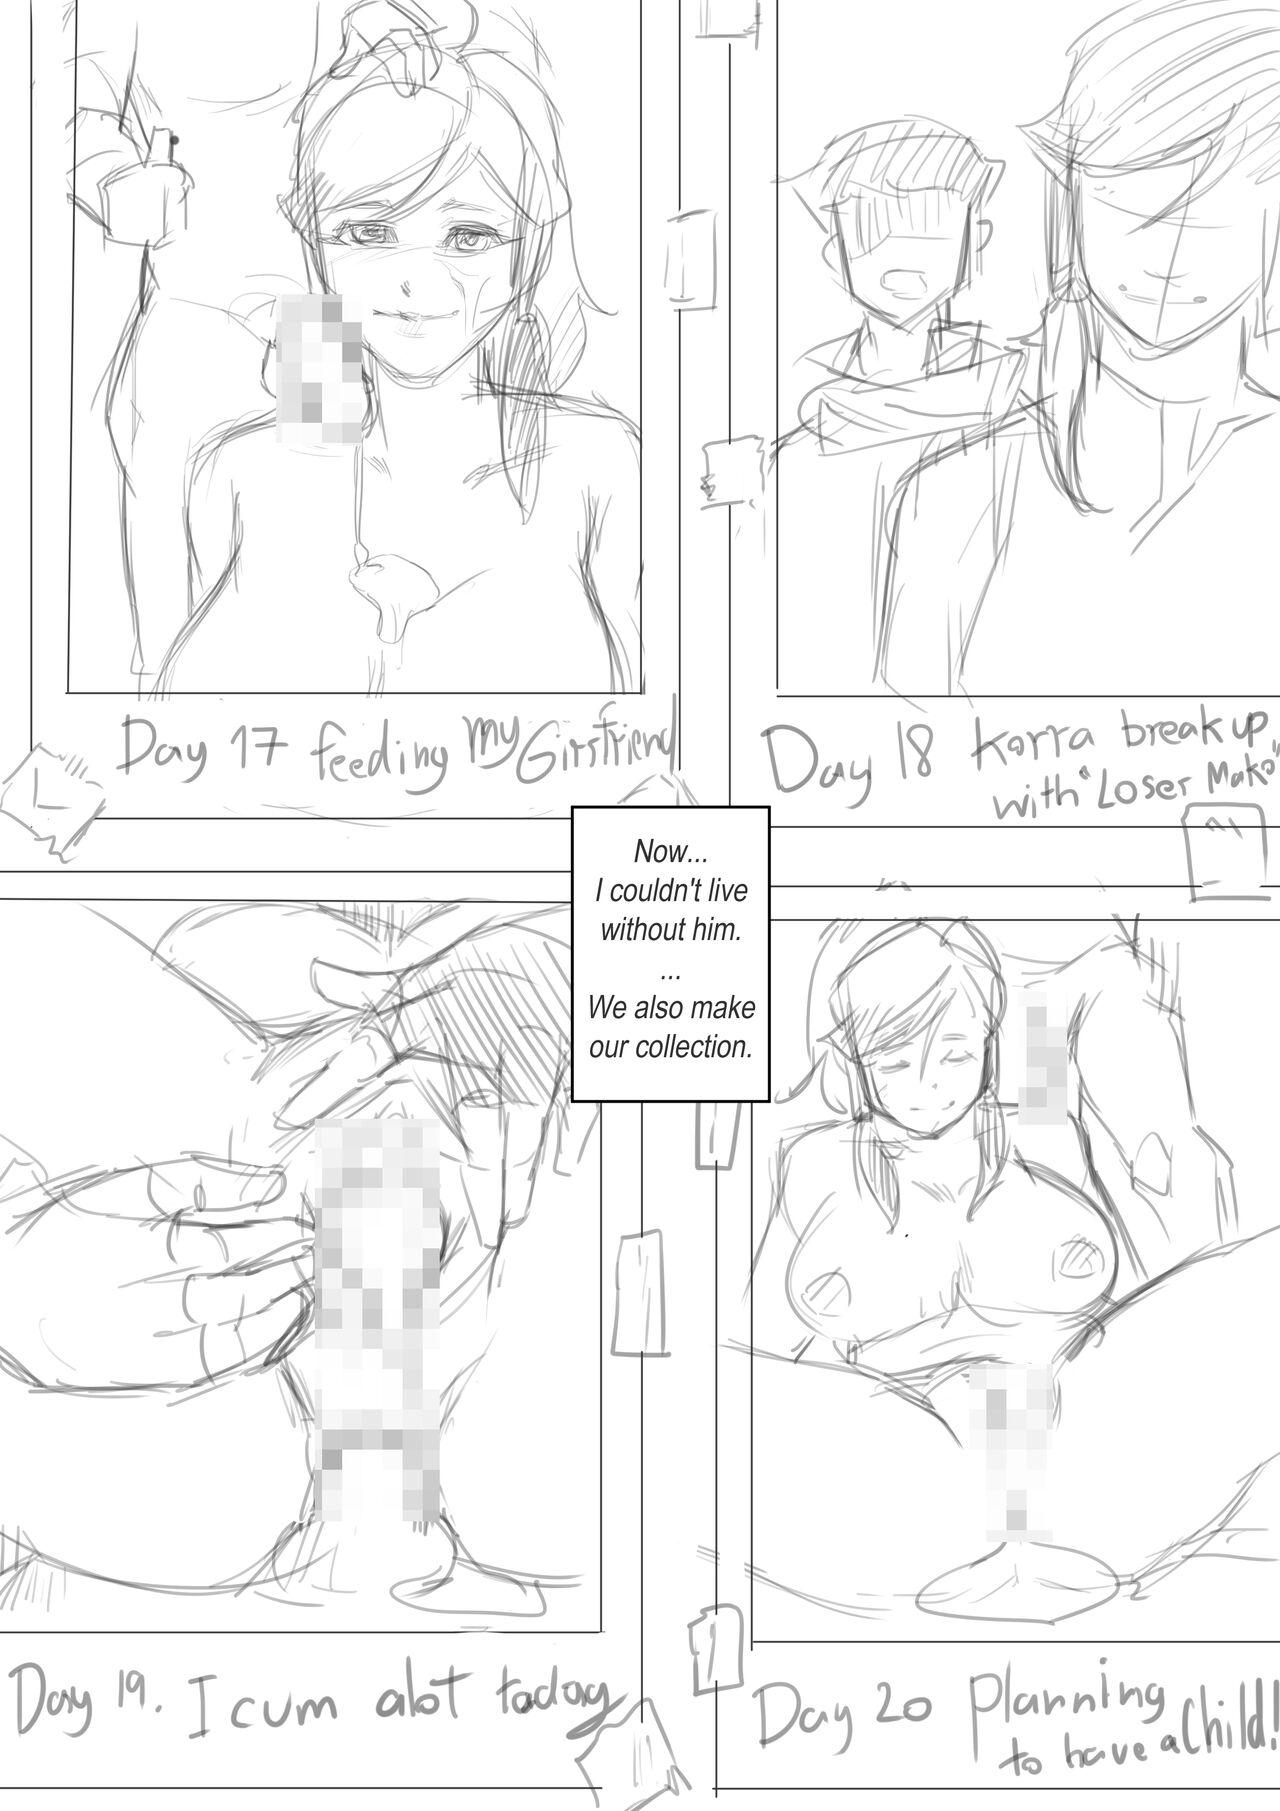 Throatfuck Avatar doujin sketch - The legend of korra Chastity - Page 11